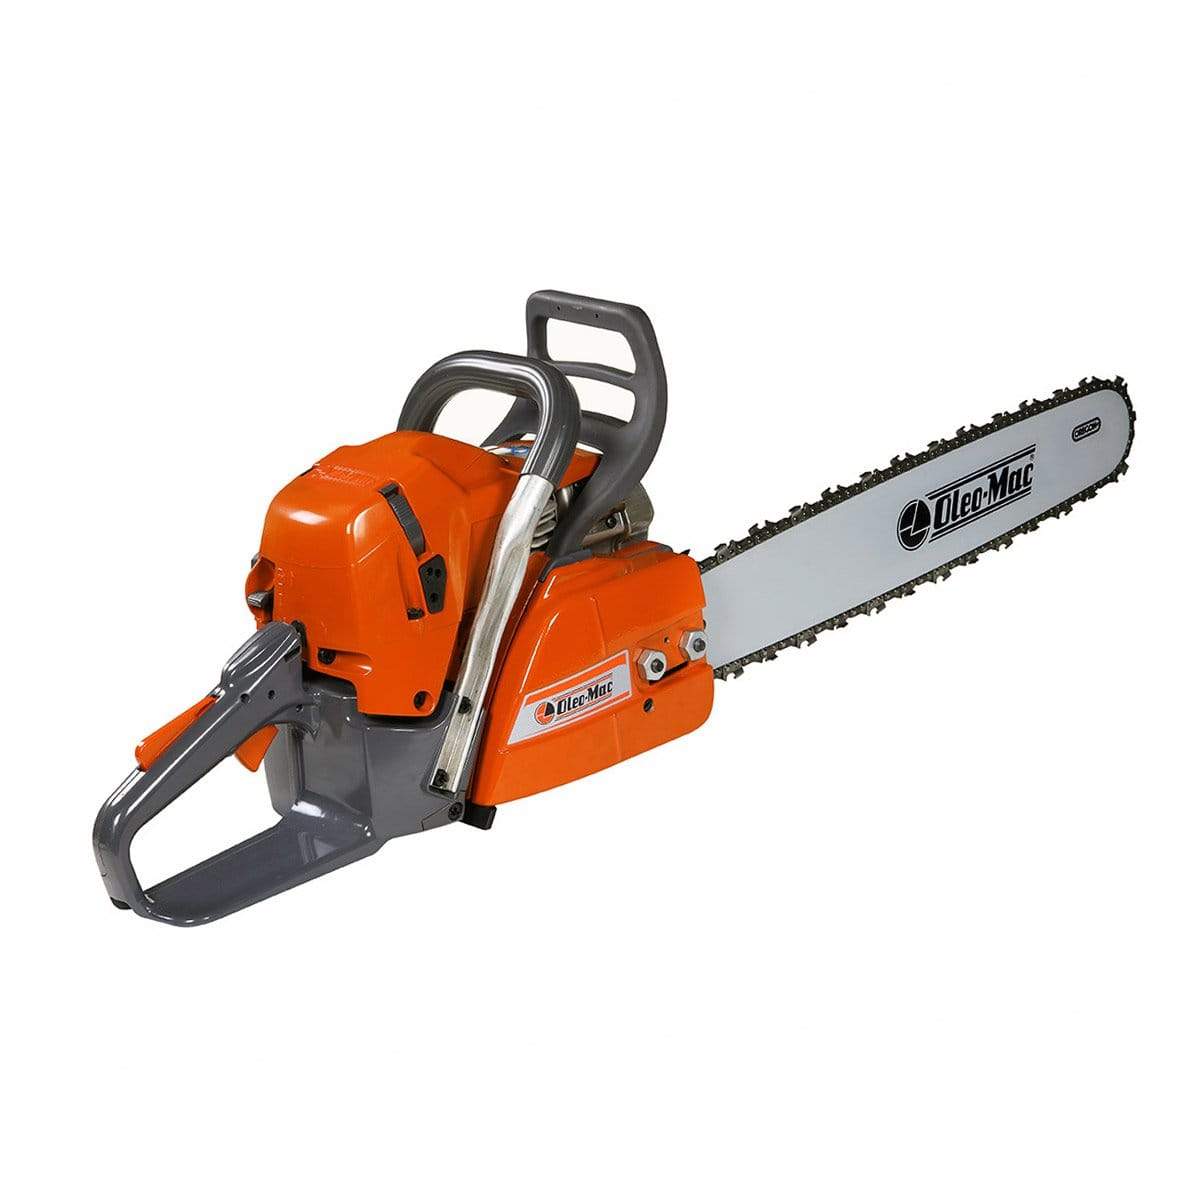 Oleo-Mac 4.7 HP Professional Chainsaw - GS 650 | Supply Master | Accra, Ghana Tools Building Steel Engineering Hardware tool